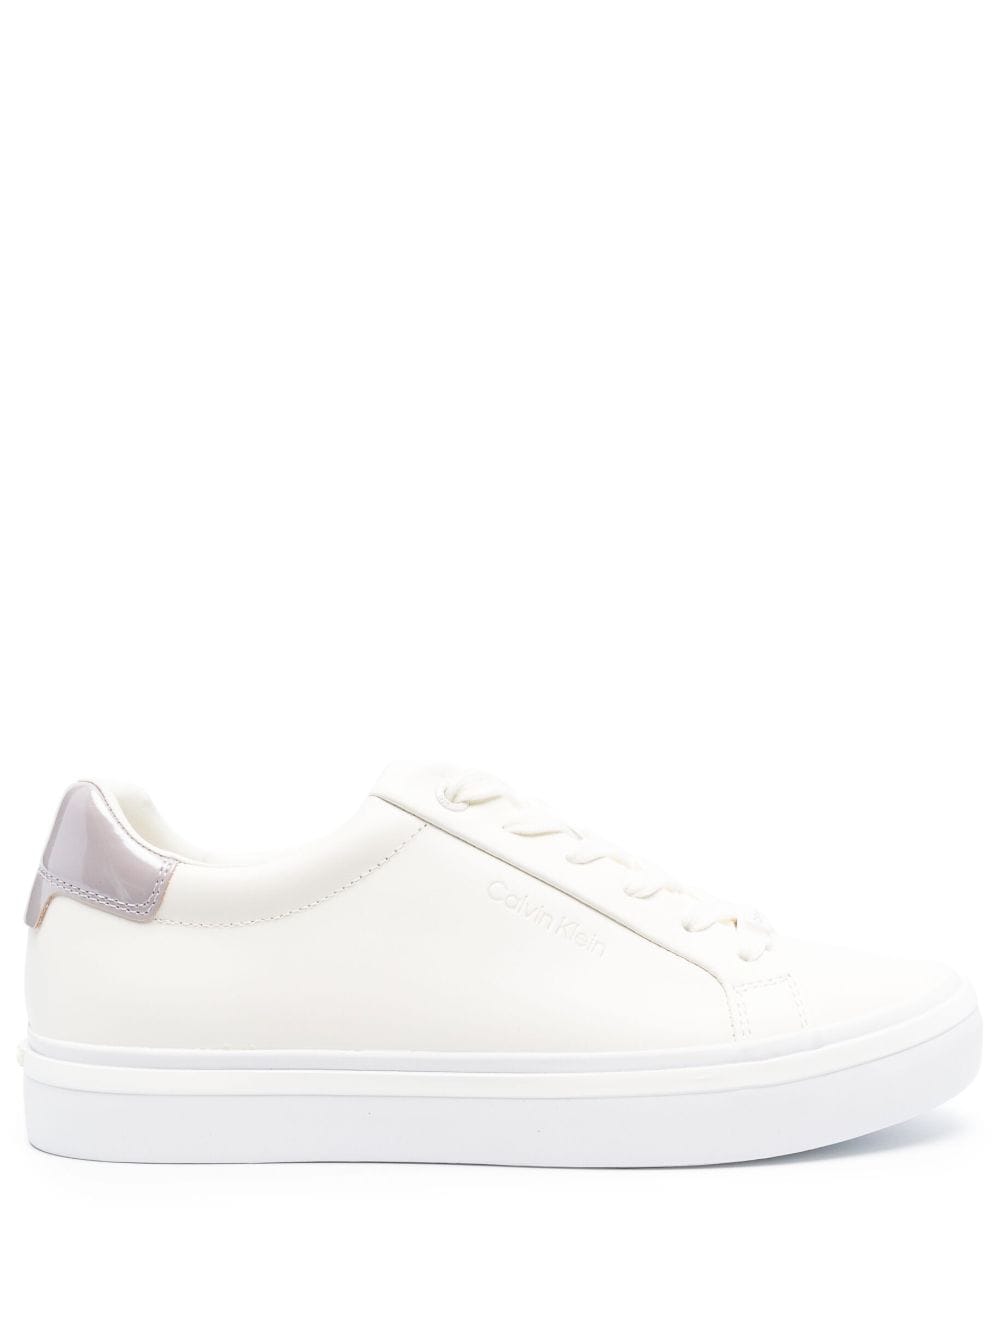 Calvin Klein Vulc lace-up sneakers - White